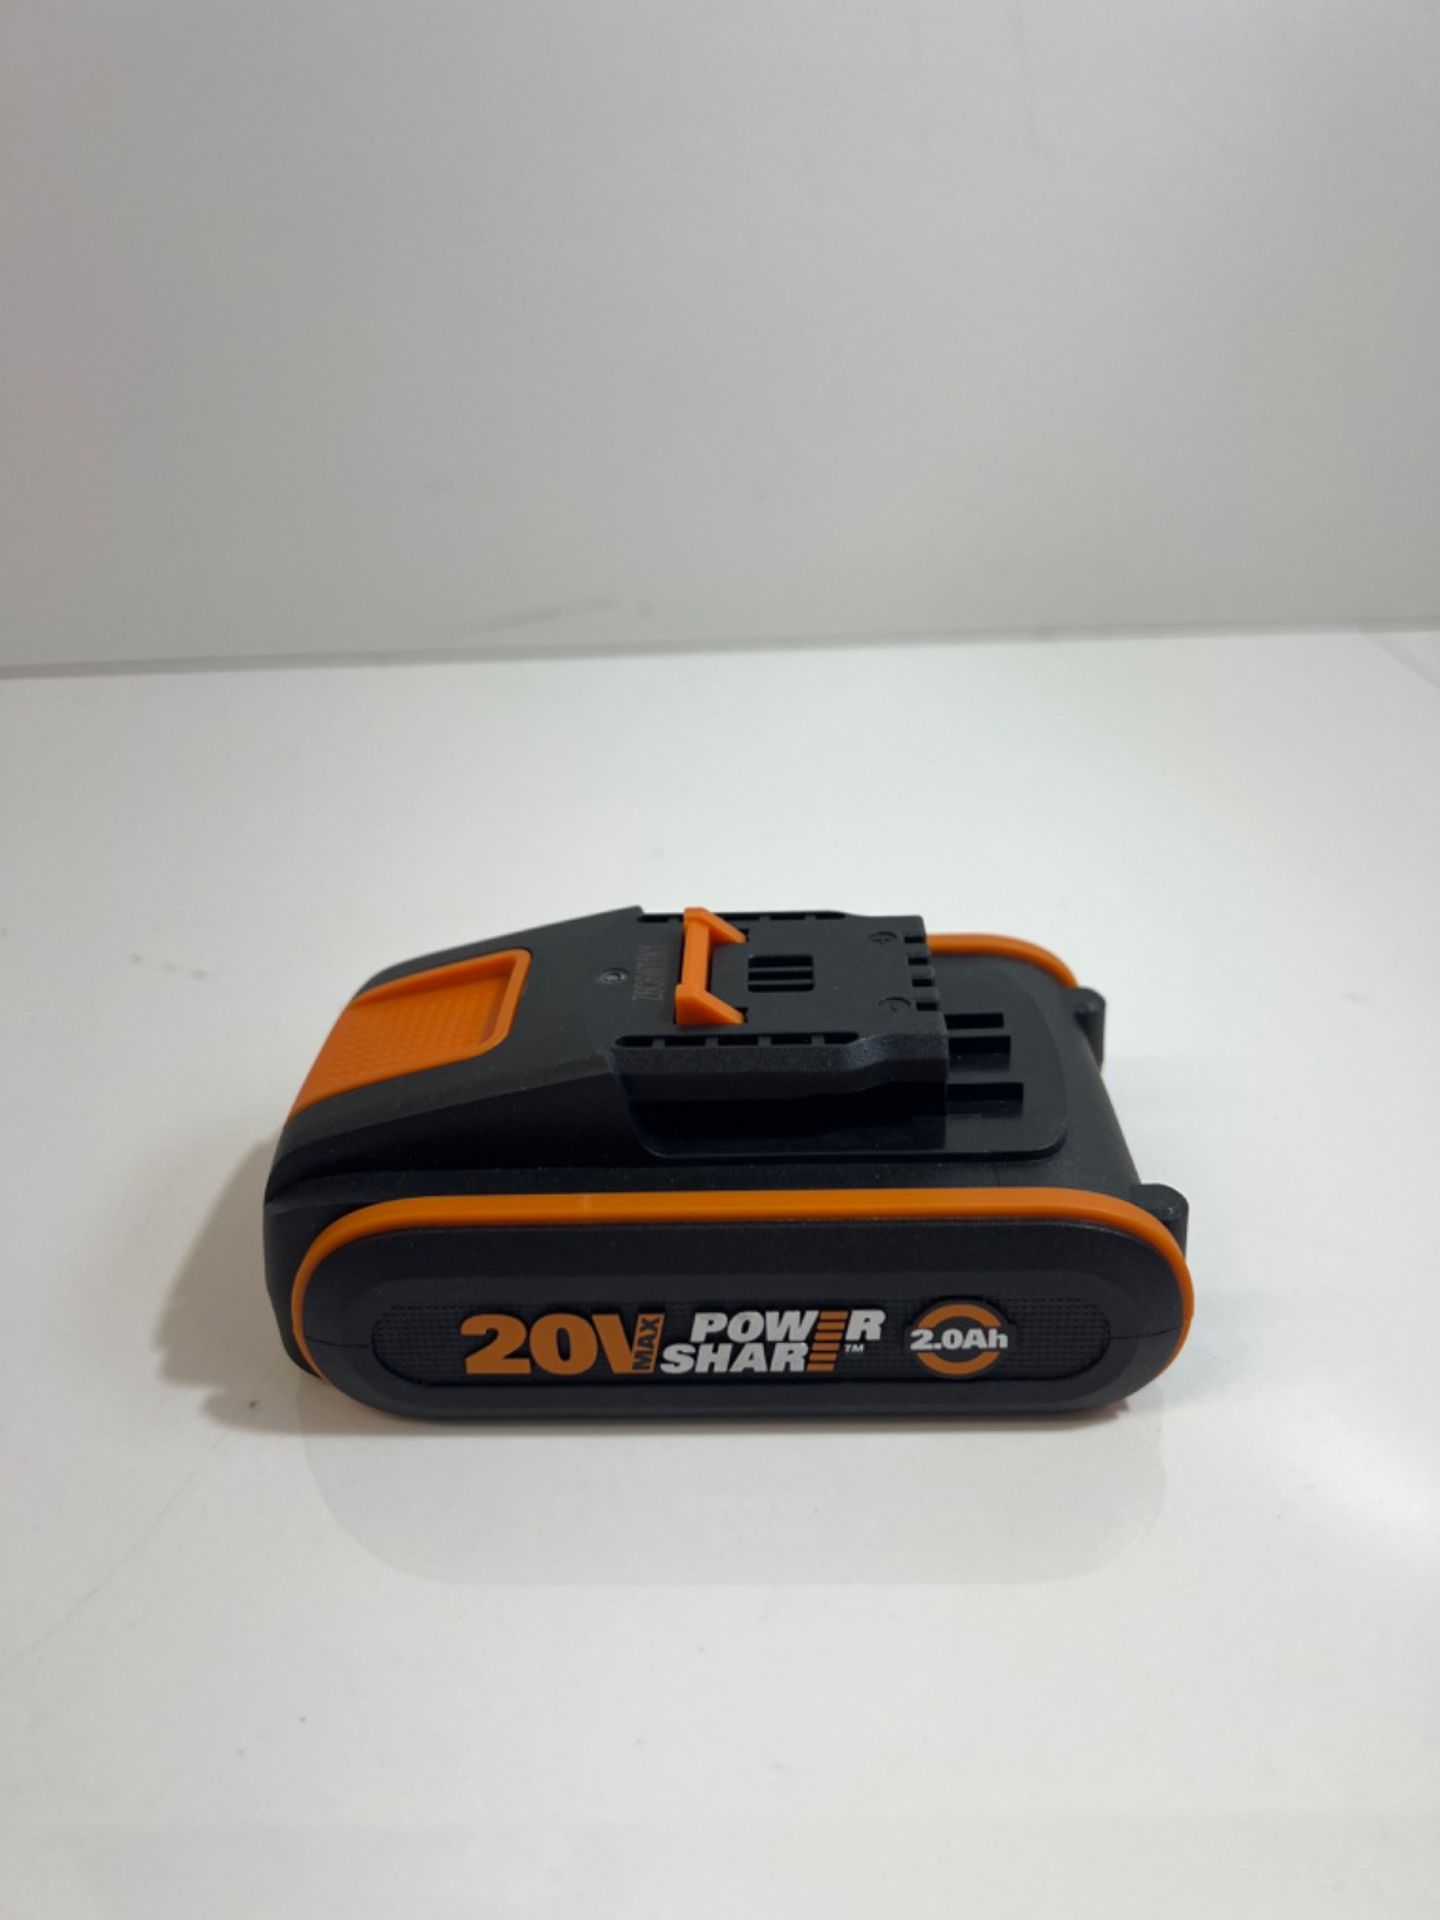 WORX WA3639 18V (20V Max) 2.0Ah Battery Pack with Battery Indicator - Image 2 of 3